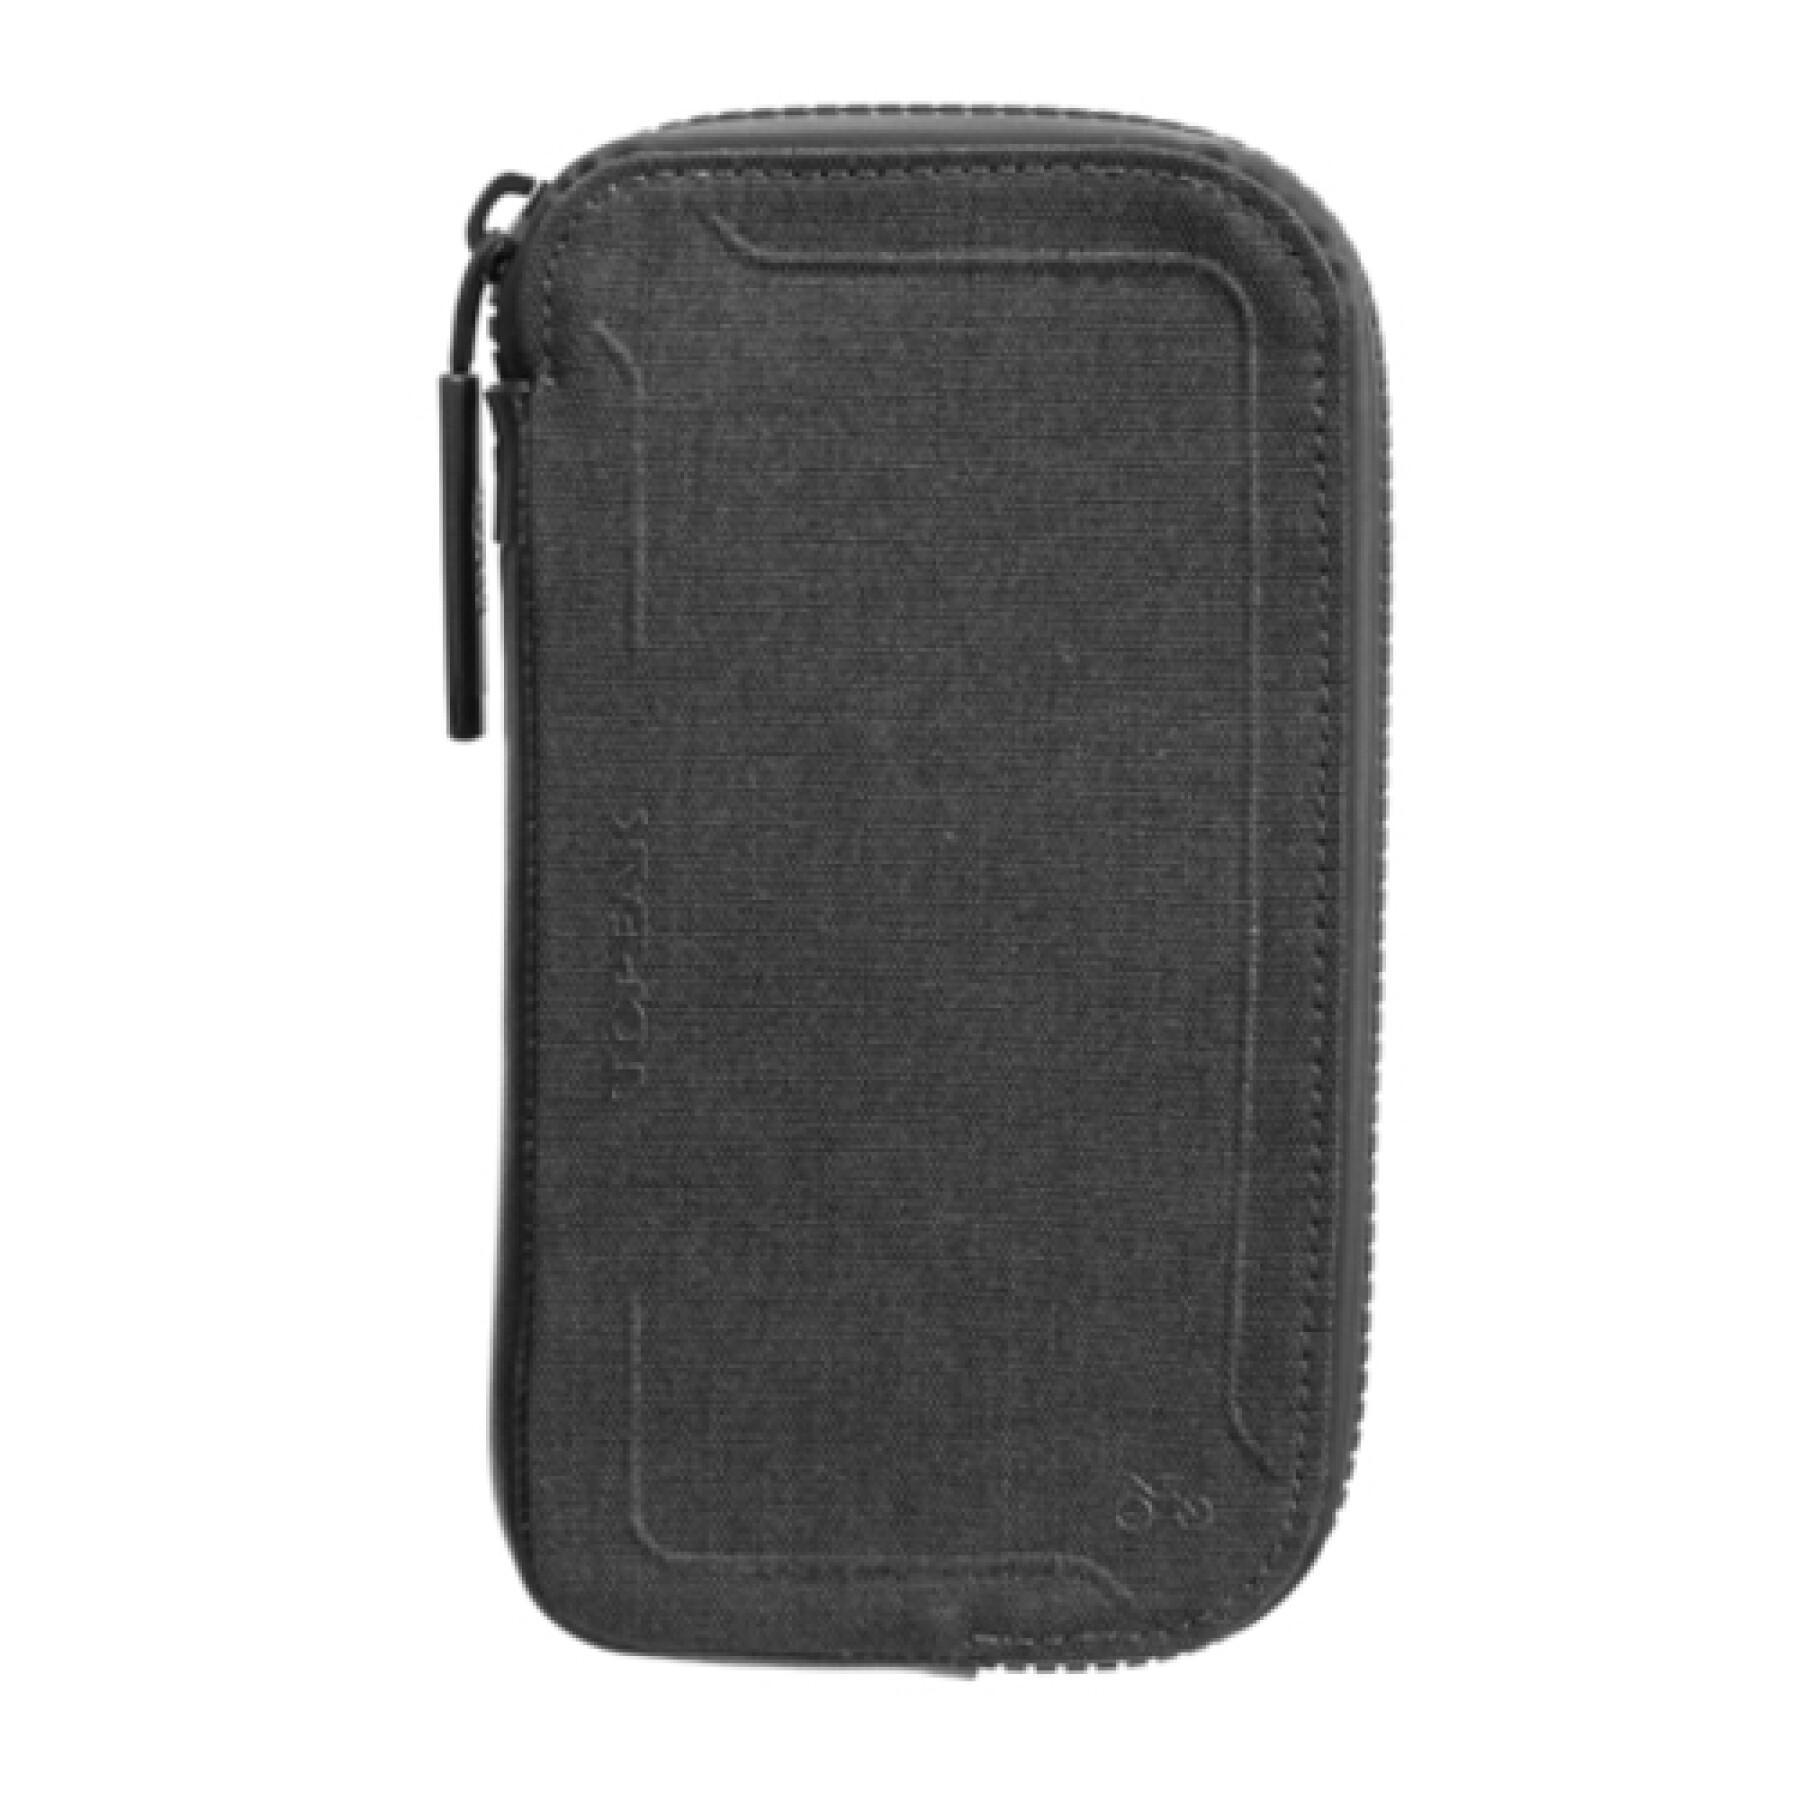 Smartphone pouch Topeak Cycling Wallet 4.7"